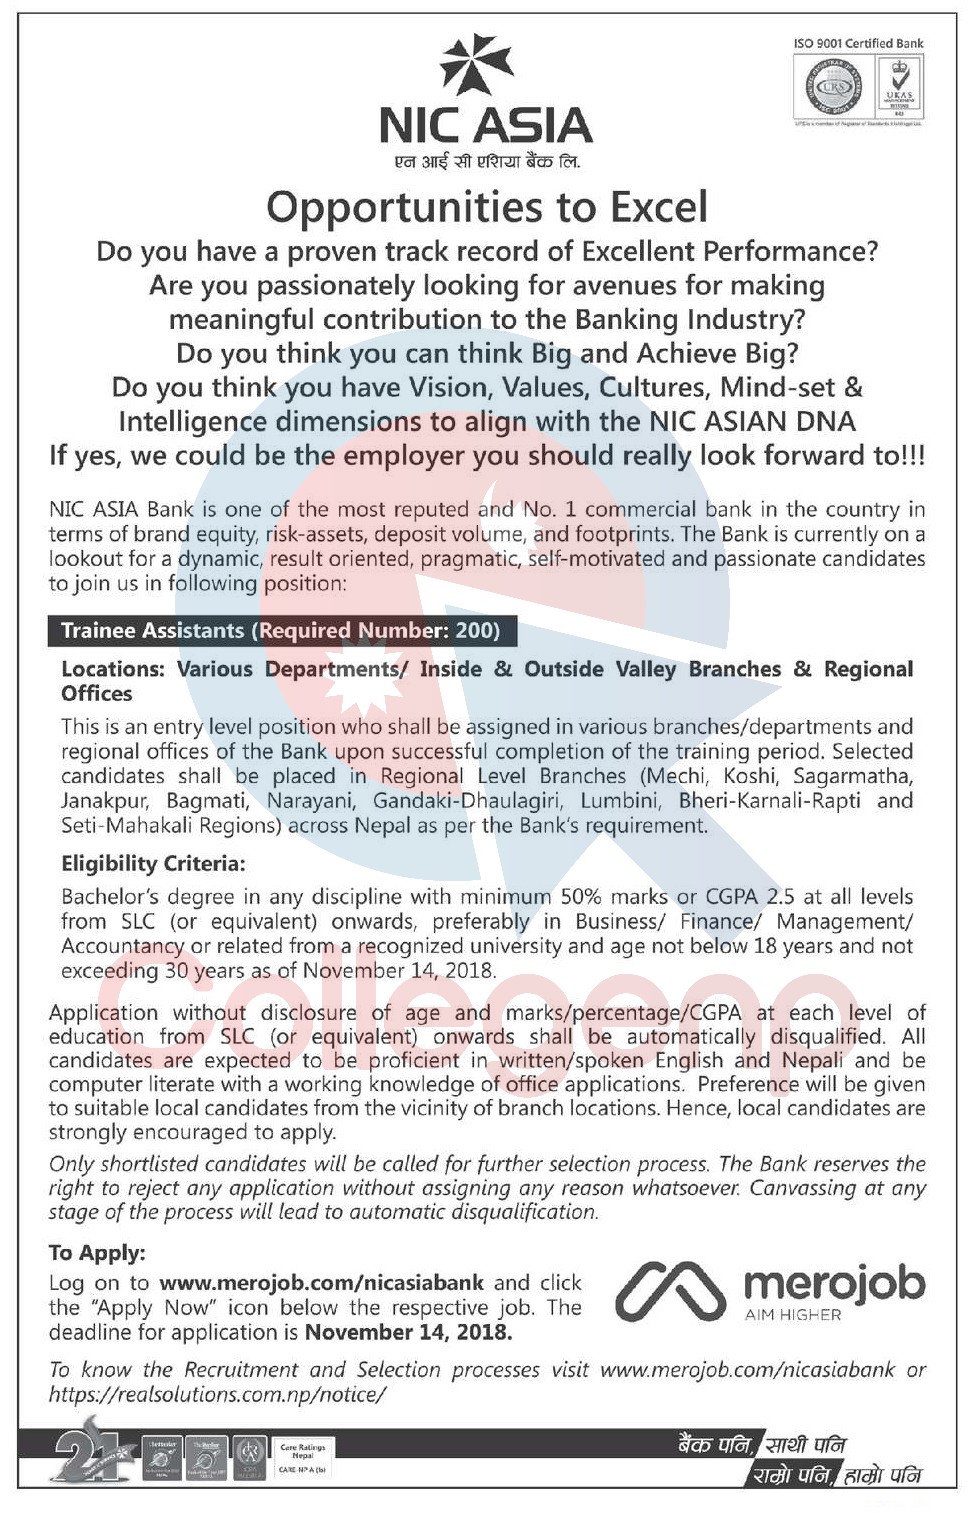 NIC Asia Bank Limited Job Vacancy Notice for 200 Trainee Assistants